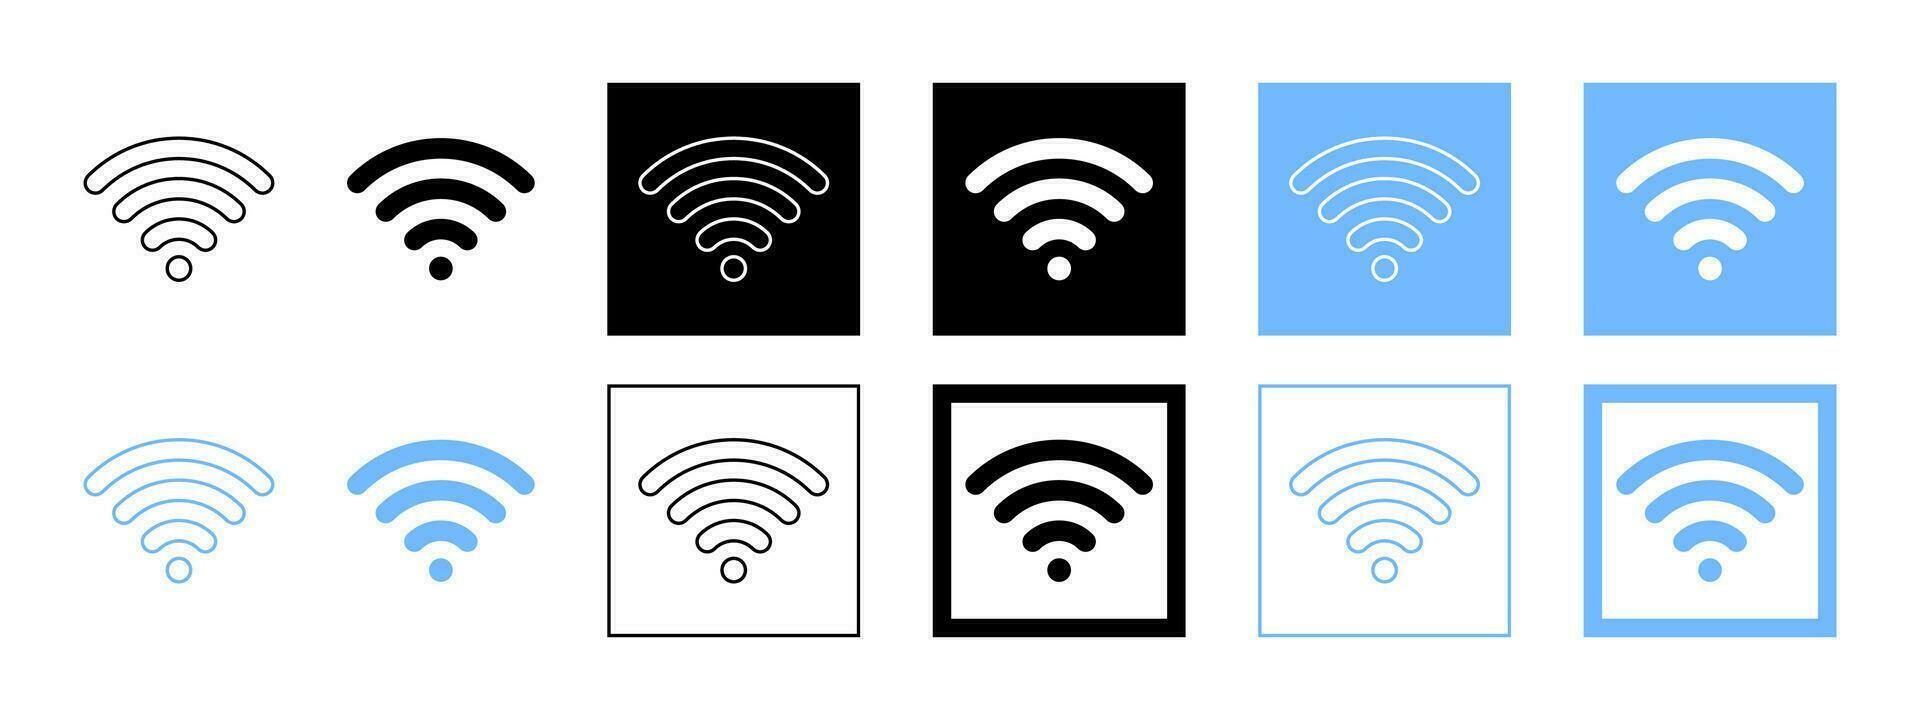 WiFi icons. Internet connection symbol. Vector icons